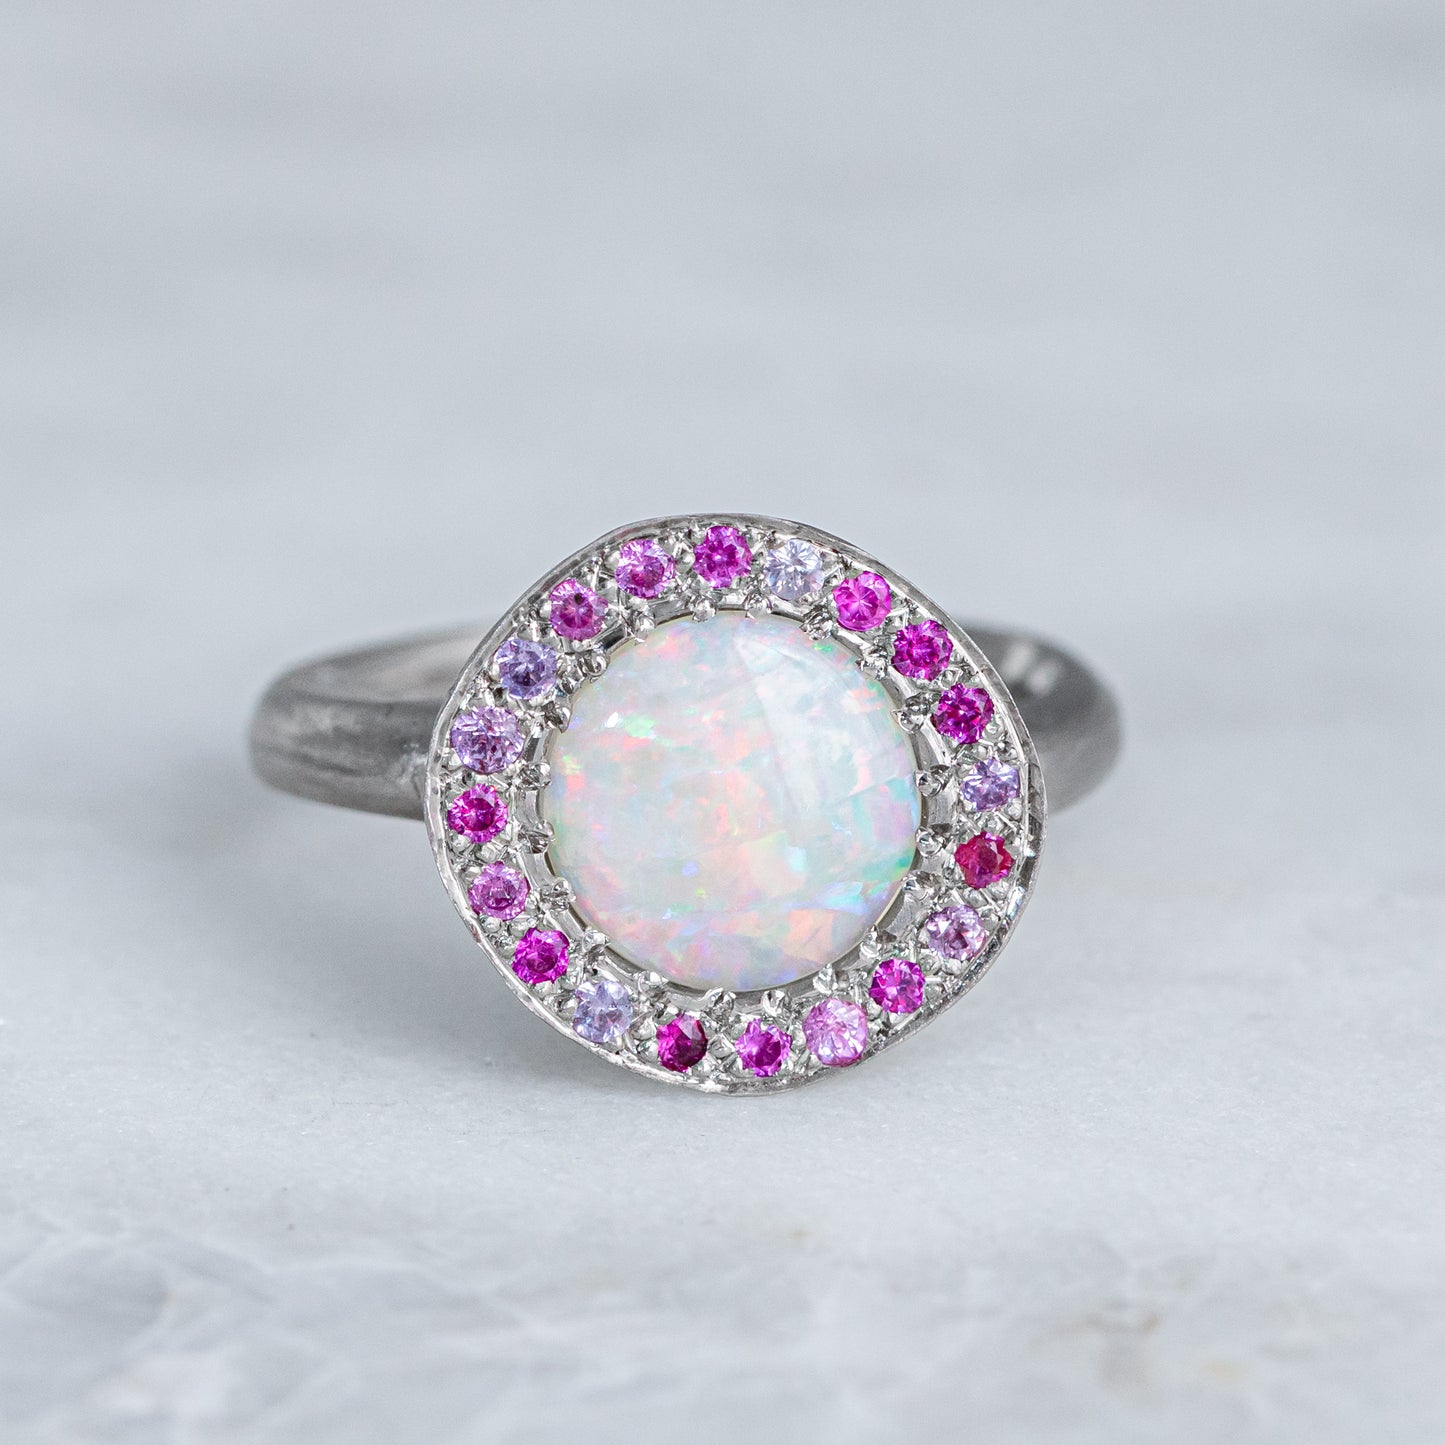 Shades Of Pink Opal Eclipse Ring